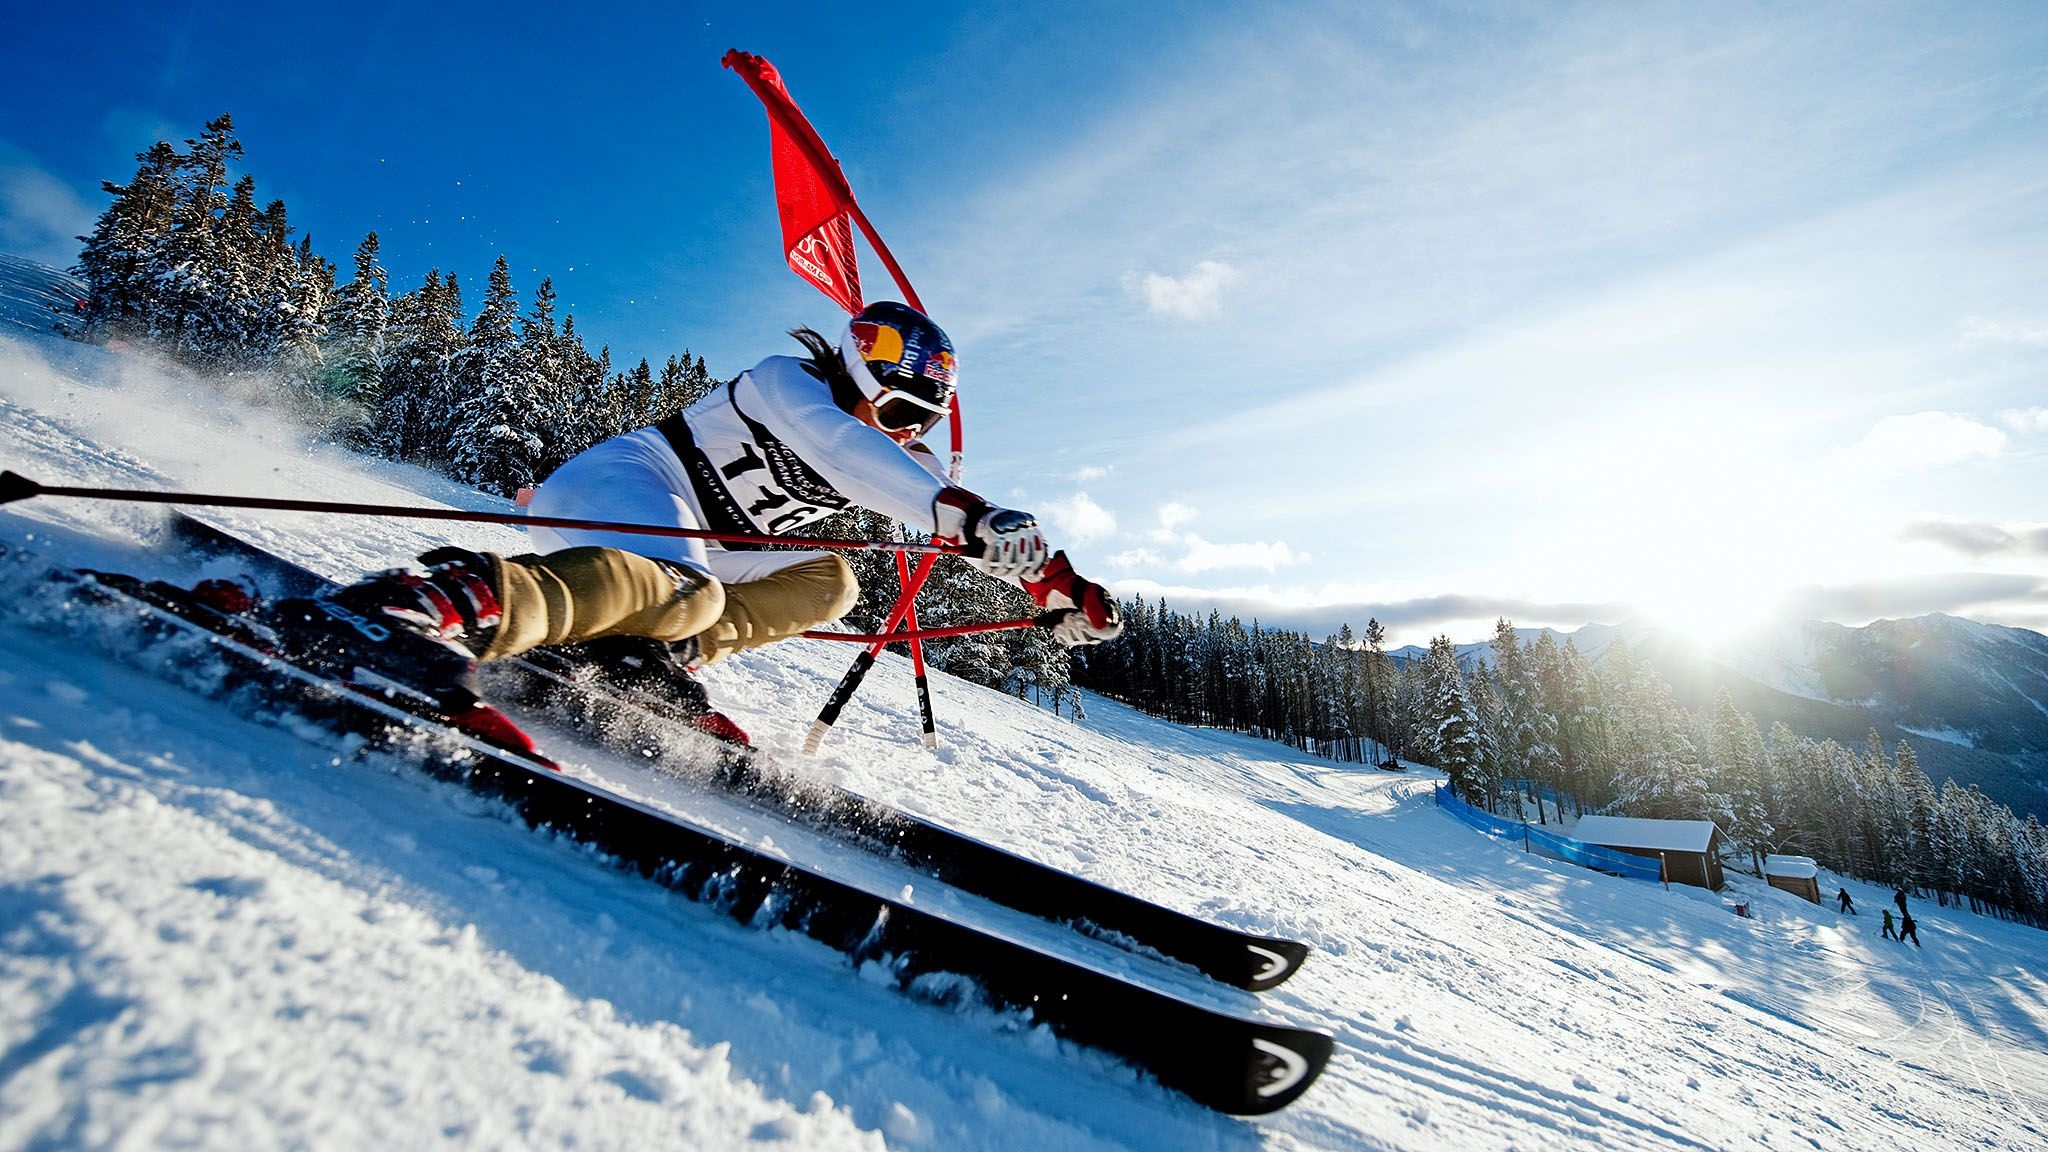 Ski racing wallpapers, Fast-paced competitions, Speed and skill, Adrenaline-fueled sport, 2050x1160 HD Desktop